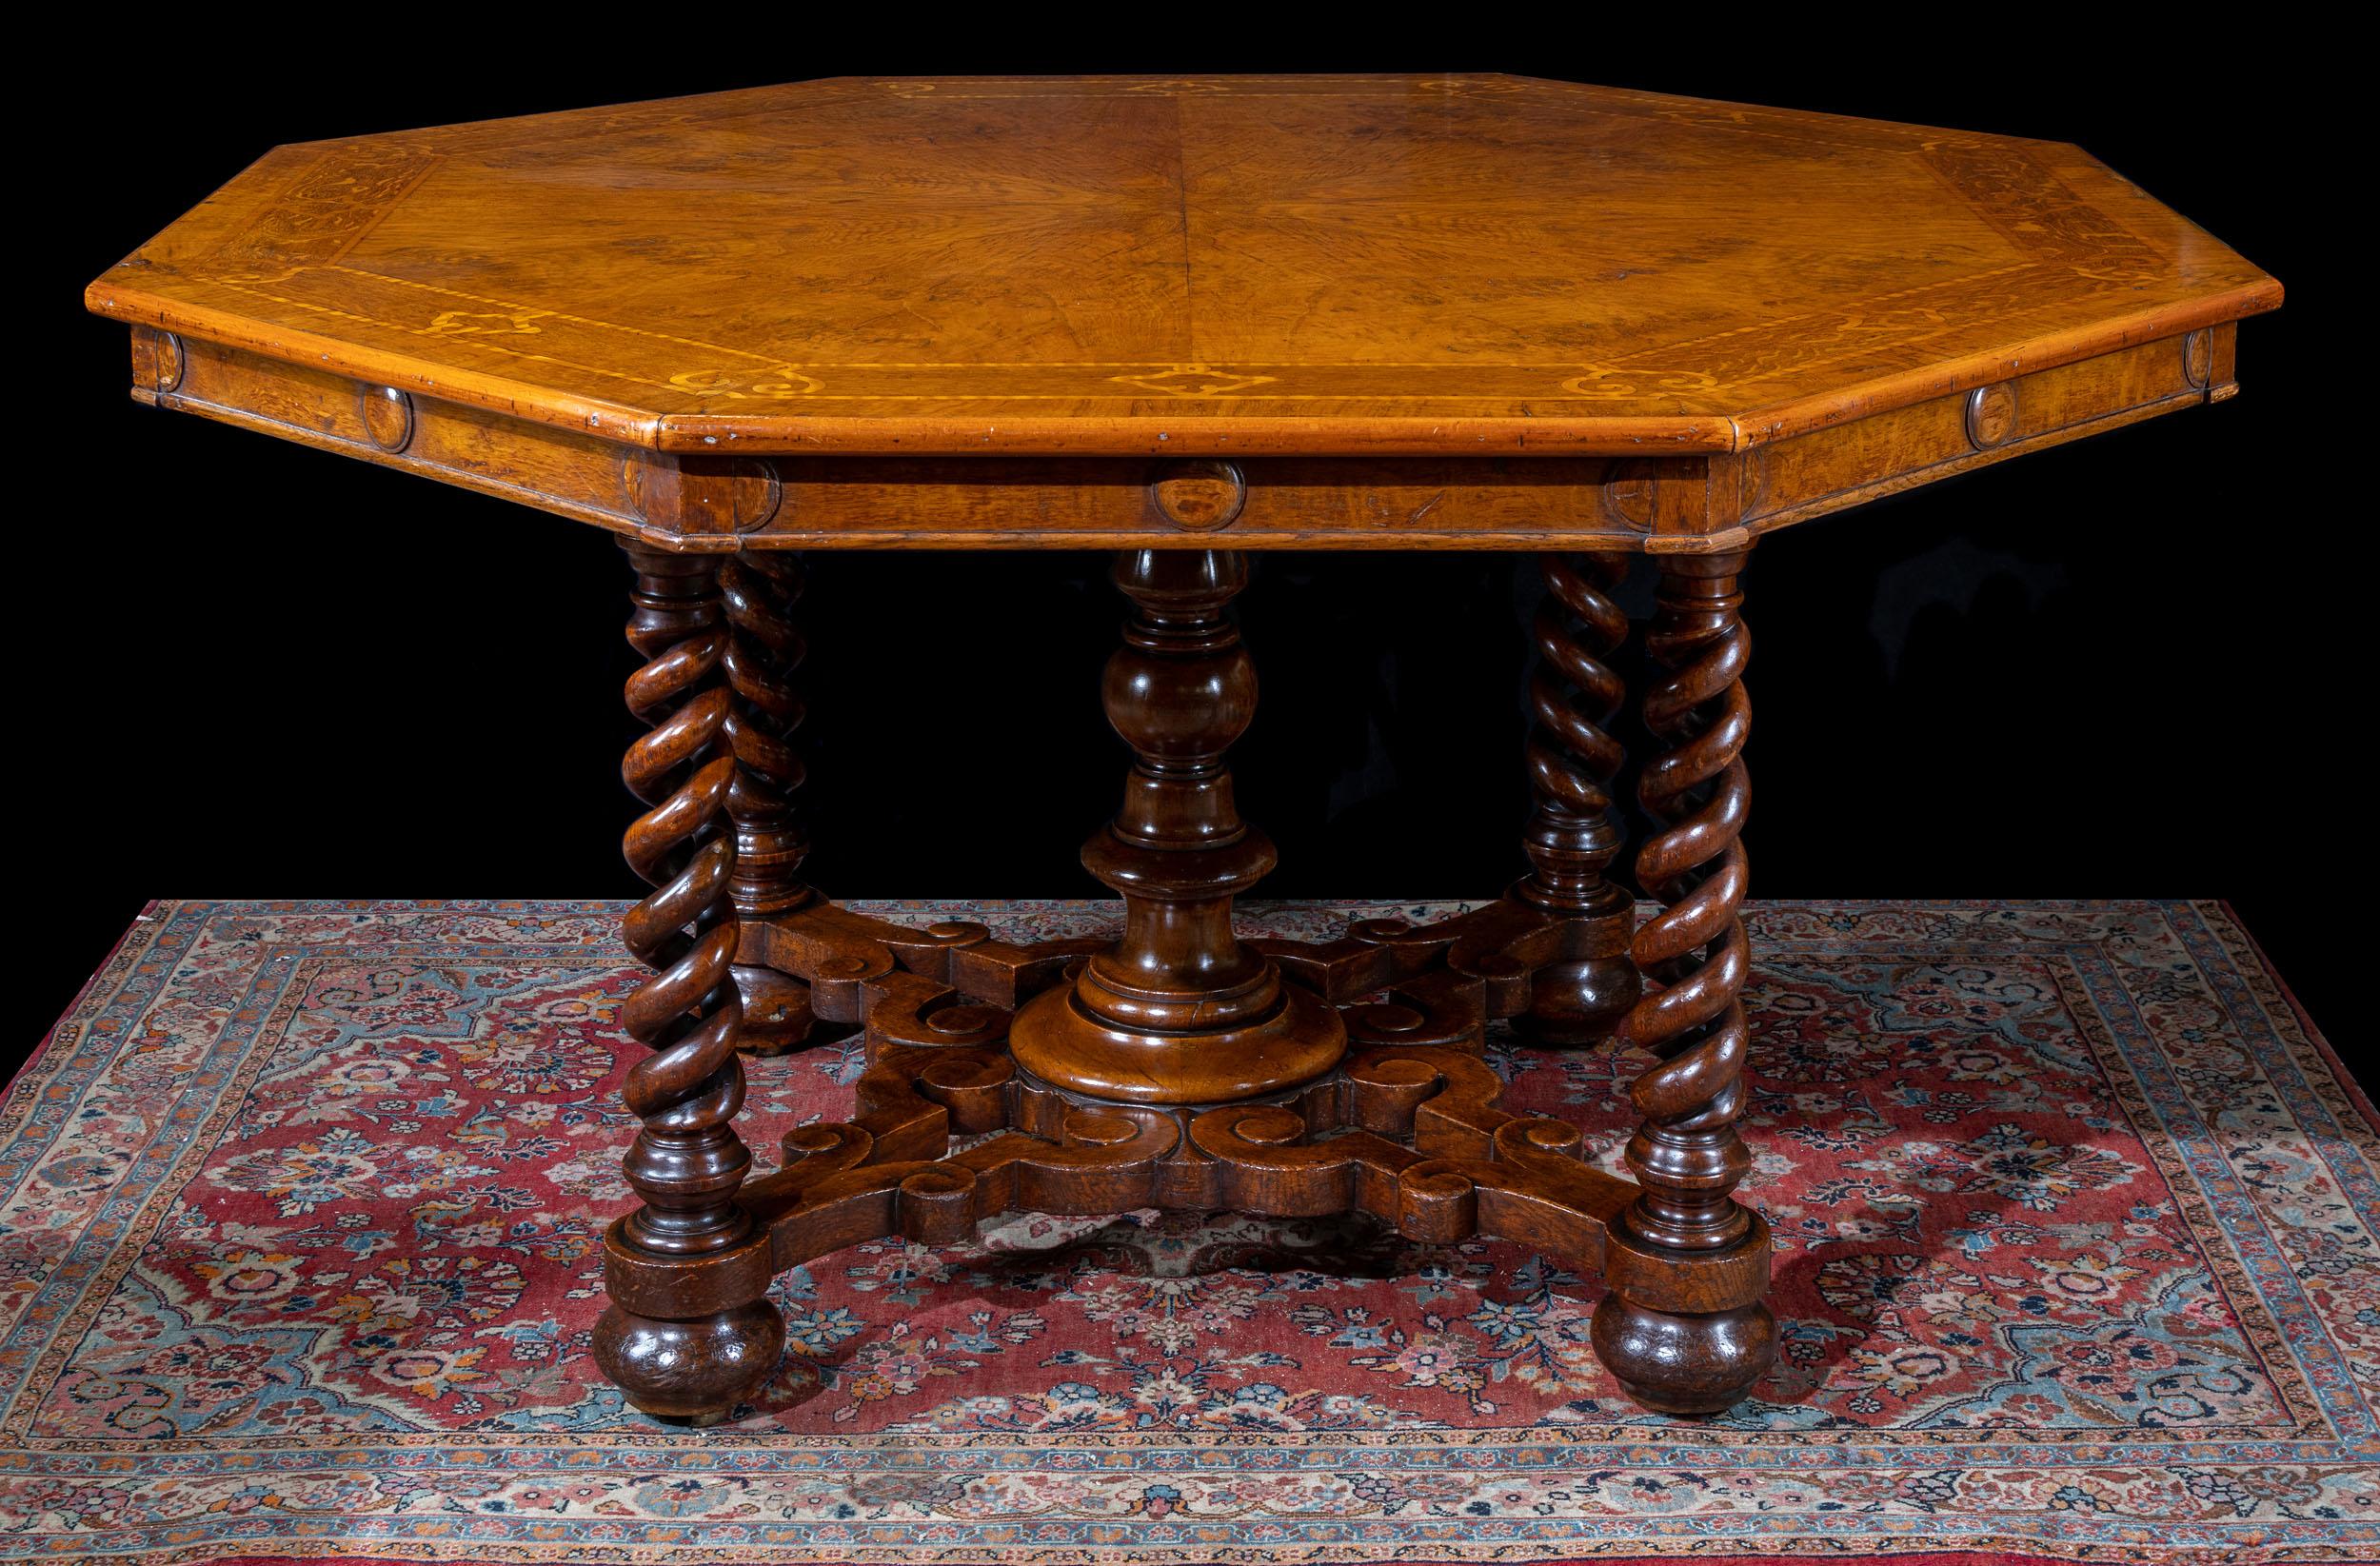 A superb octagonal centre table in the manner of Thomas King. The fine octagonal top in book matched pollard oak veneer, inlaid with a satinwood border, on a pit sawn oak top. This rests on four spiral twist legs joined by scrolling stretchers and